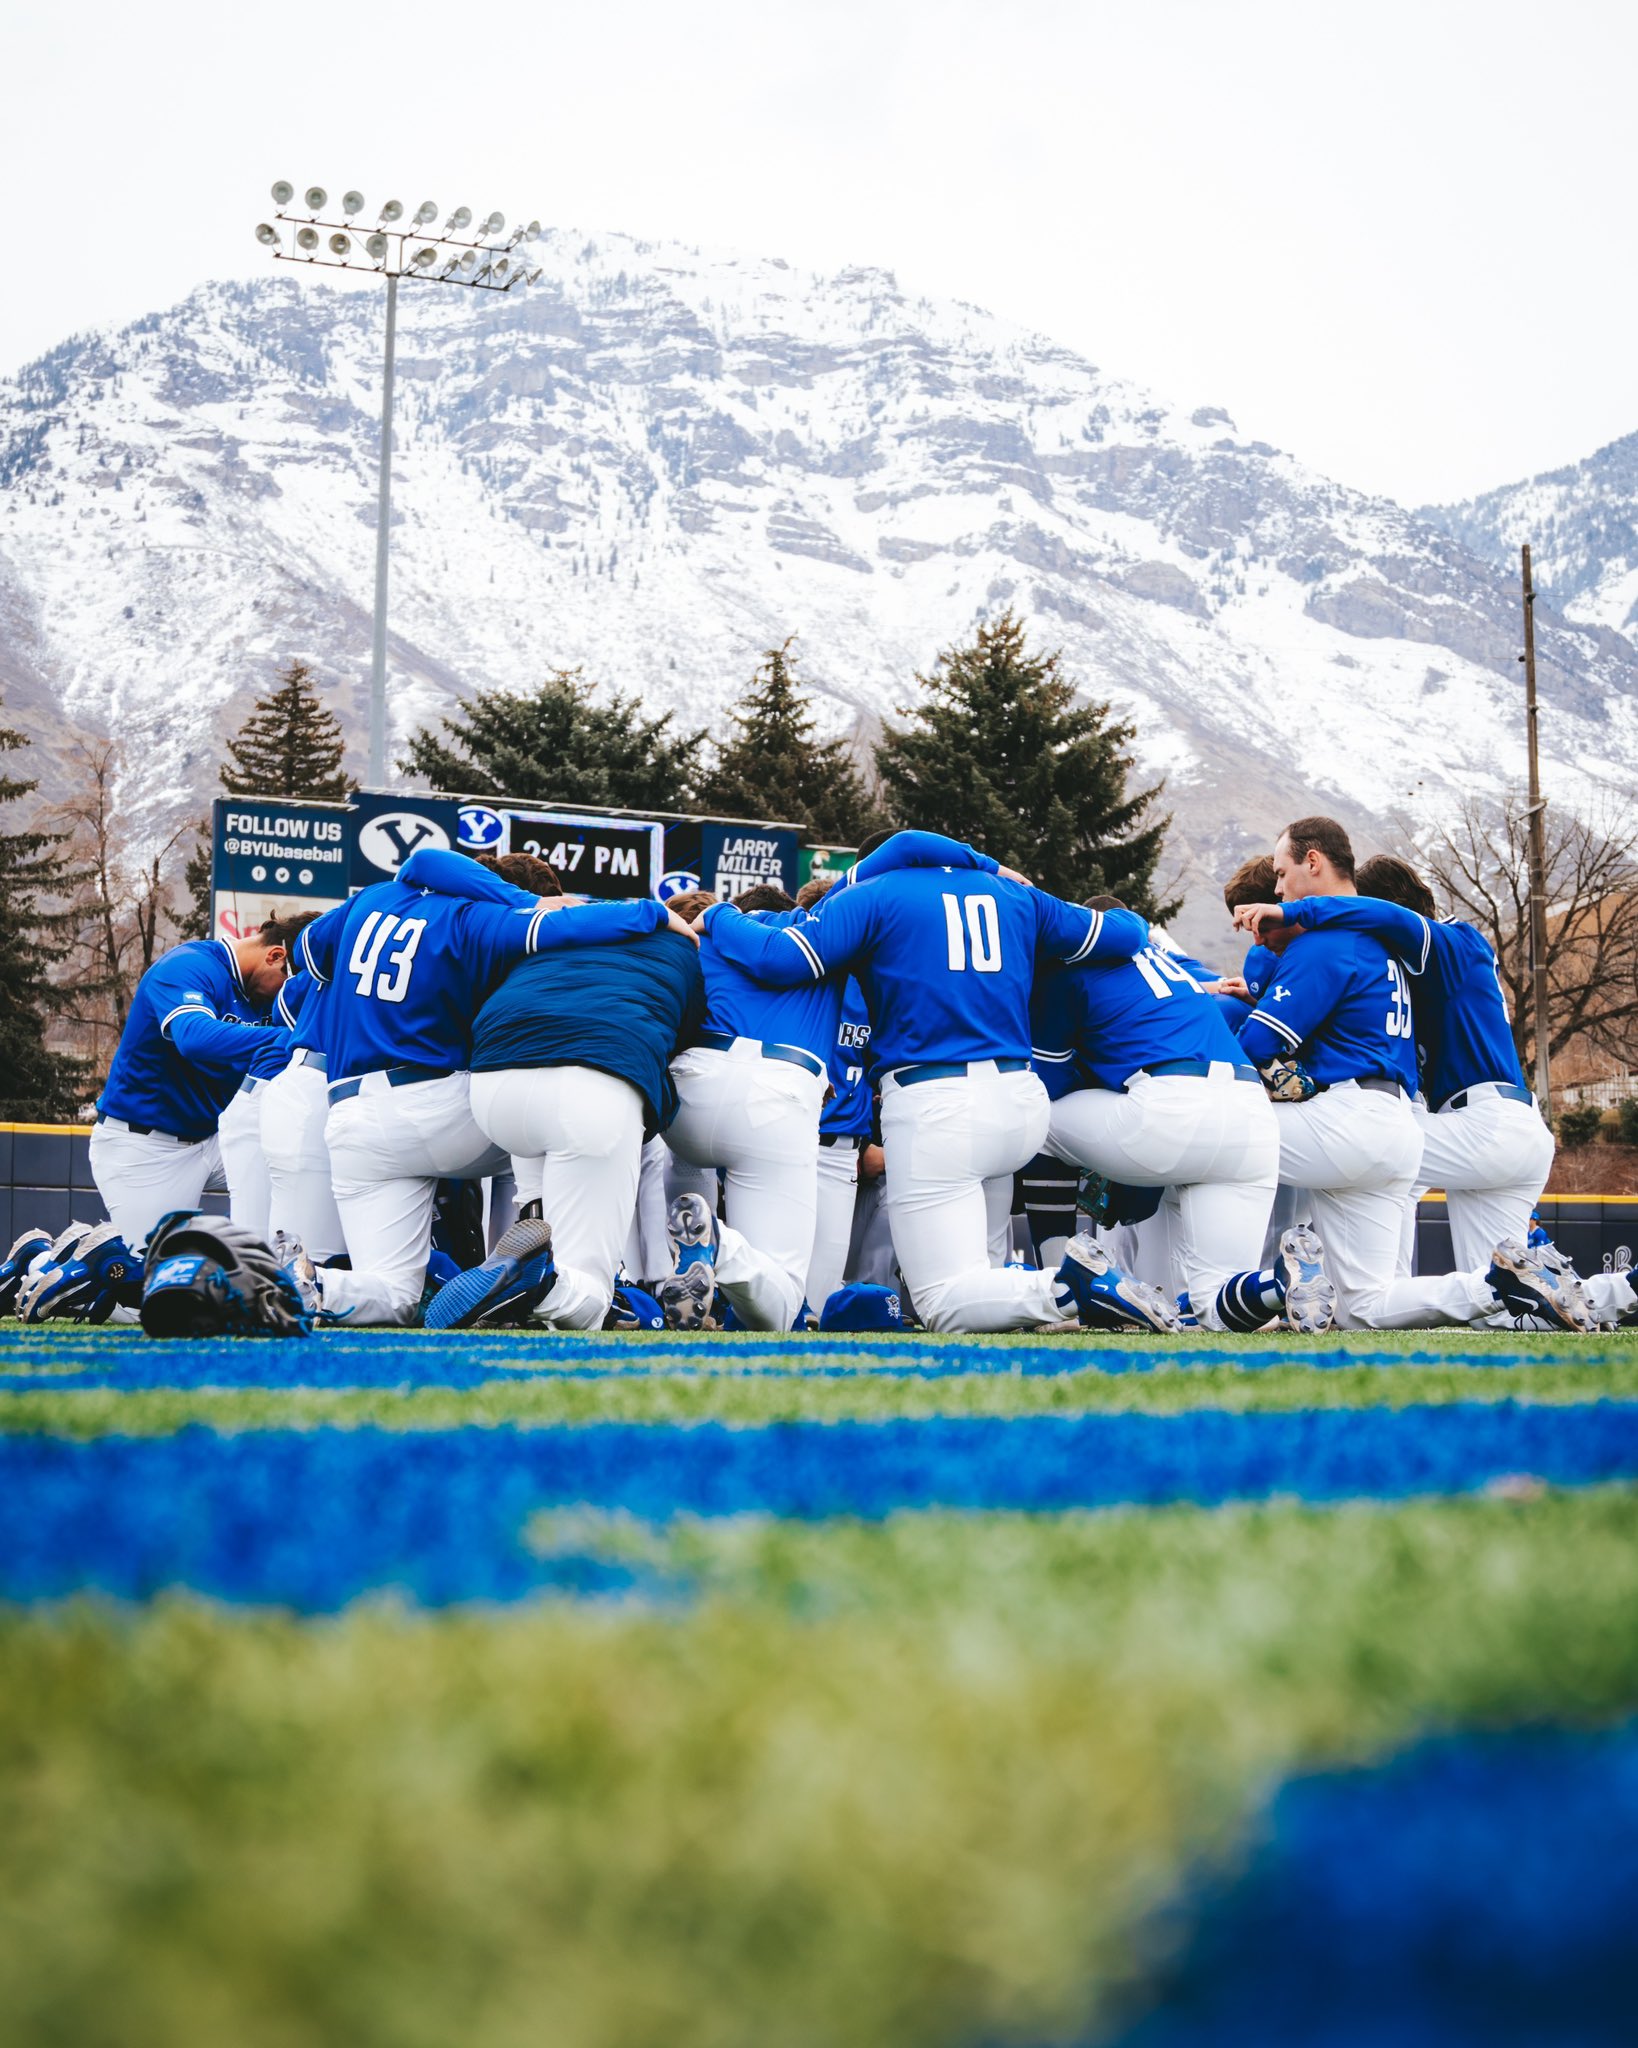 BYU baseball plates 15 runs in exciting win over UVU The Daily Universe